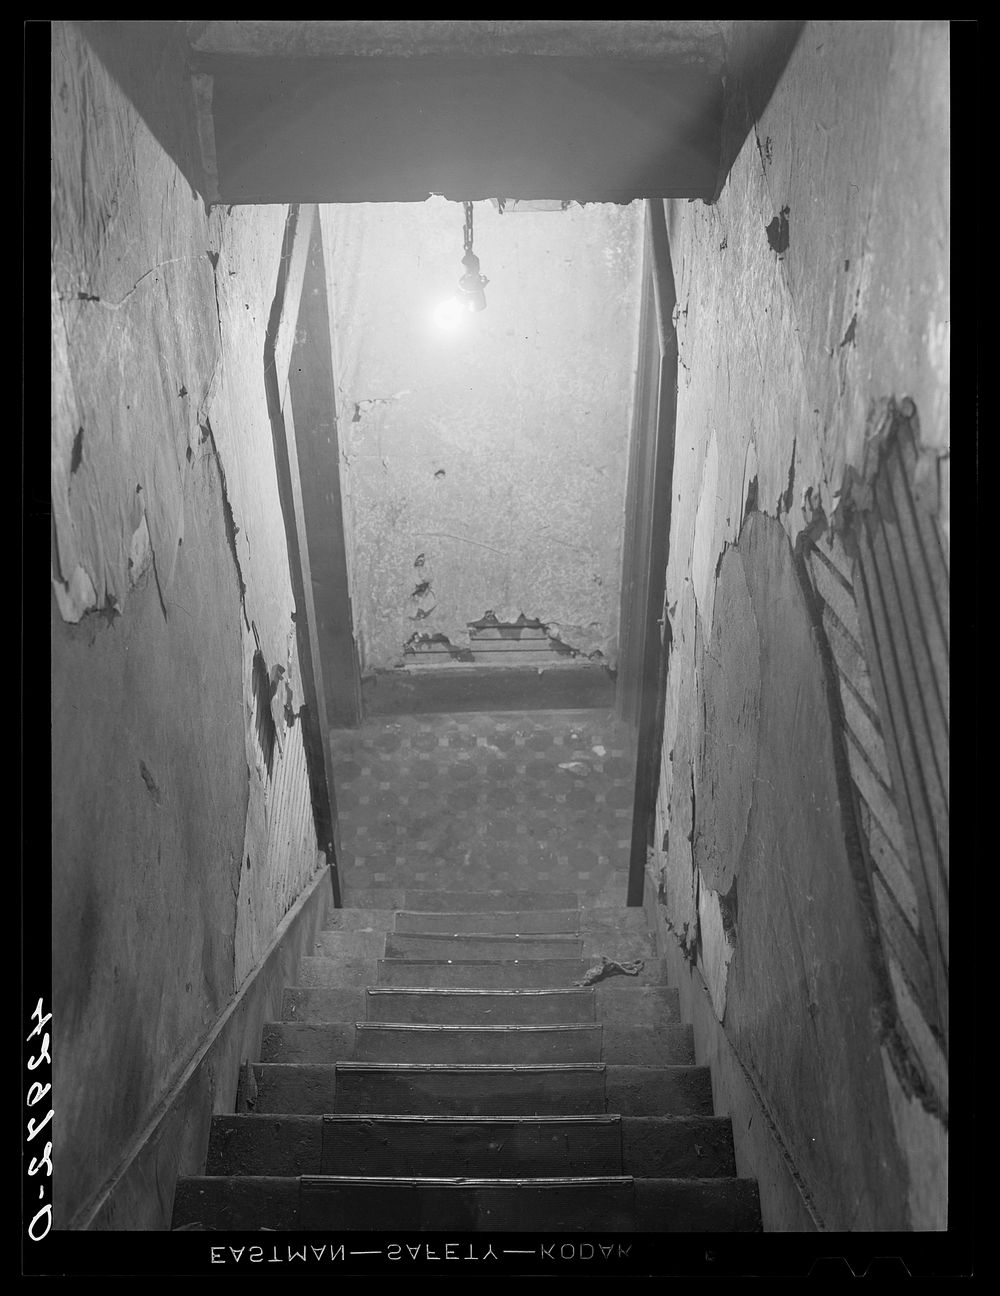 [Untitled photo, possibly related to: Stairway in a house in the Mount Washington district of Beaver Falls, Pennsylvania].…